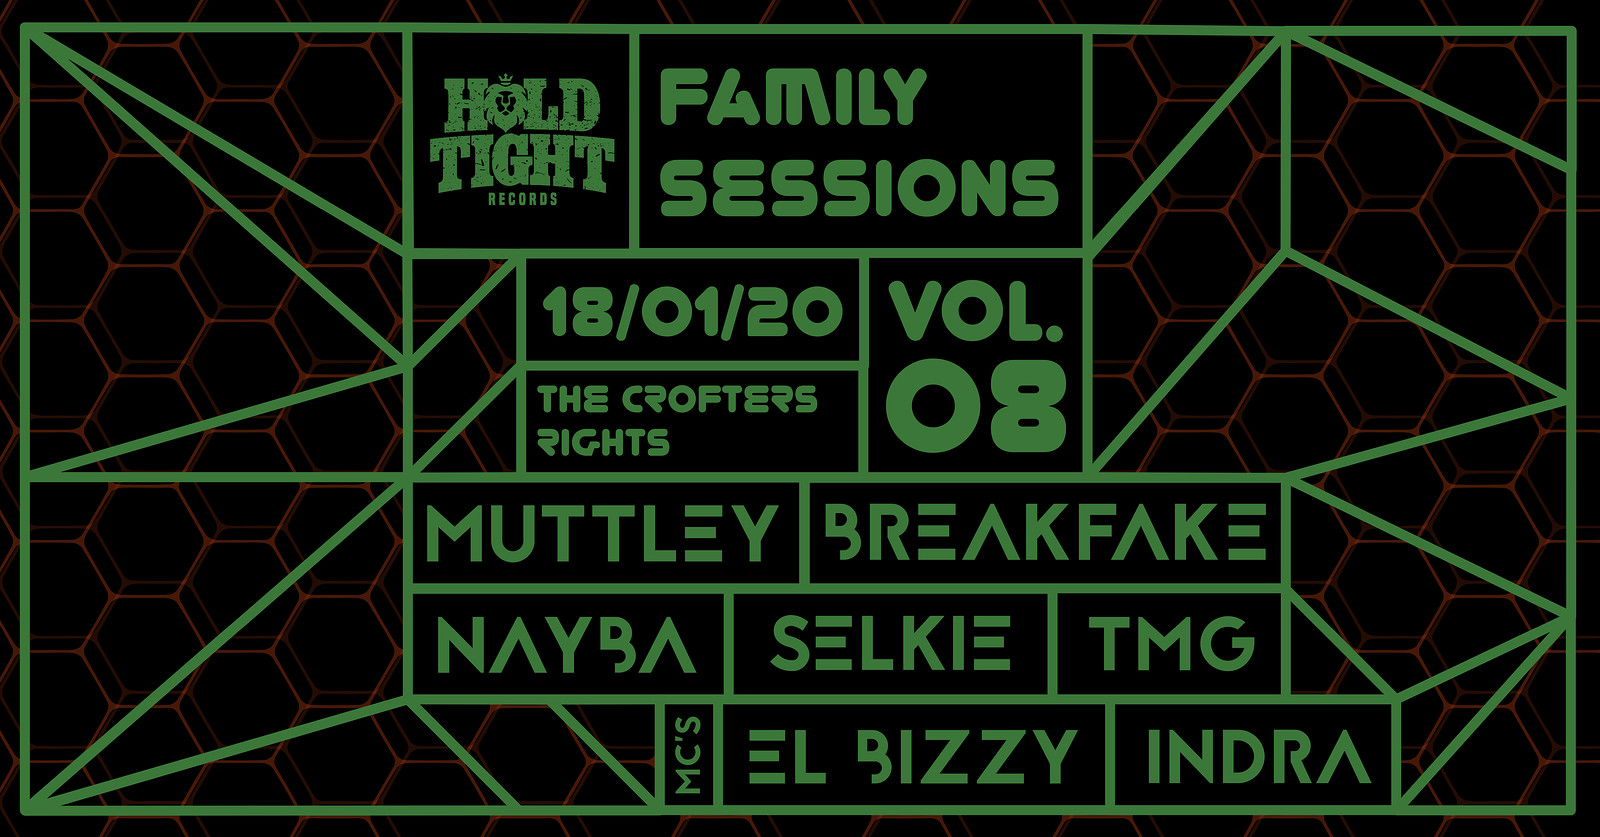 Hold Tight Records Family Sessions: Vol 8 at Crofters Rights